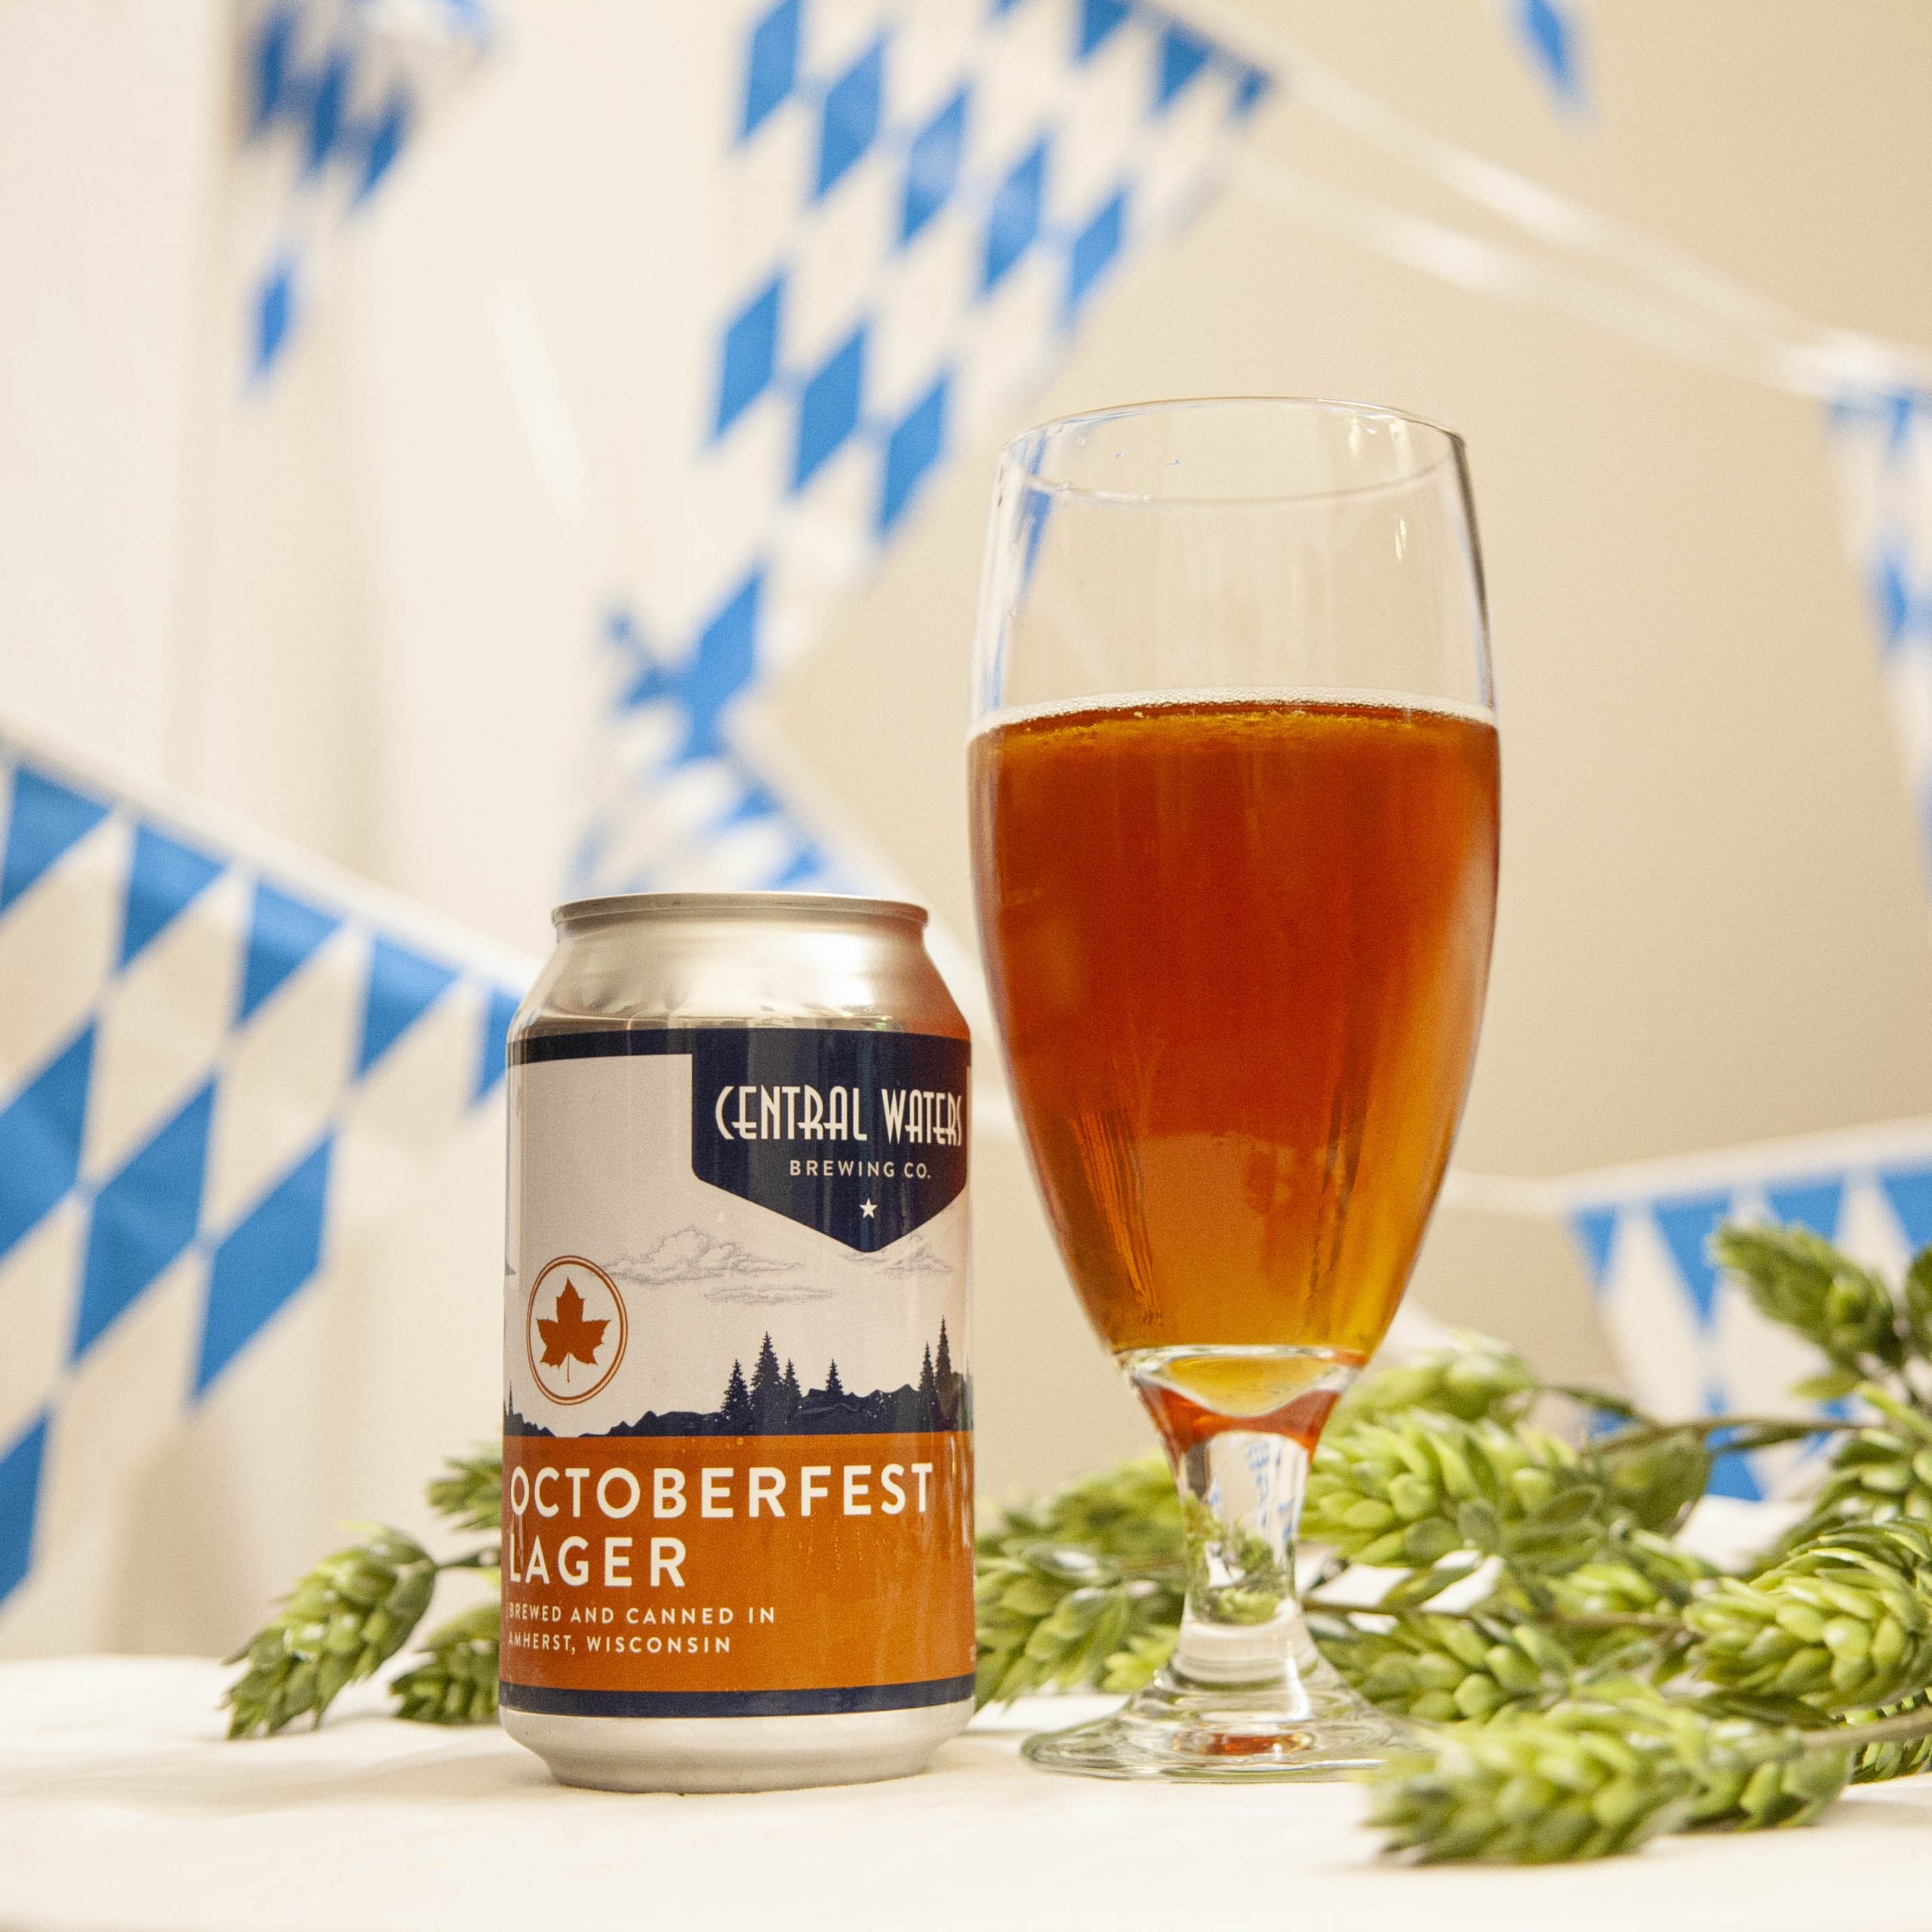 Central Waters' Octoberfest Lager is poured into a chalice glass, amidst hop cones and decorative blue and white bunting.